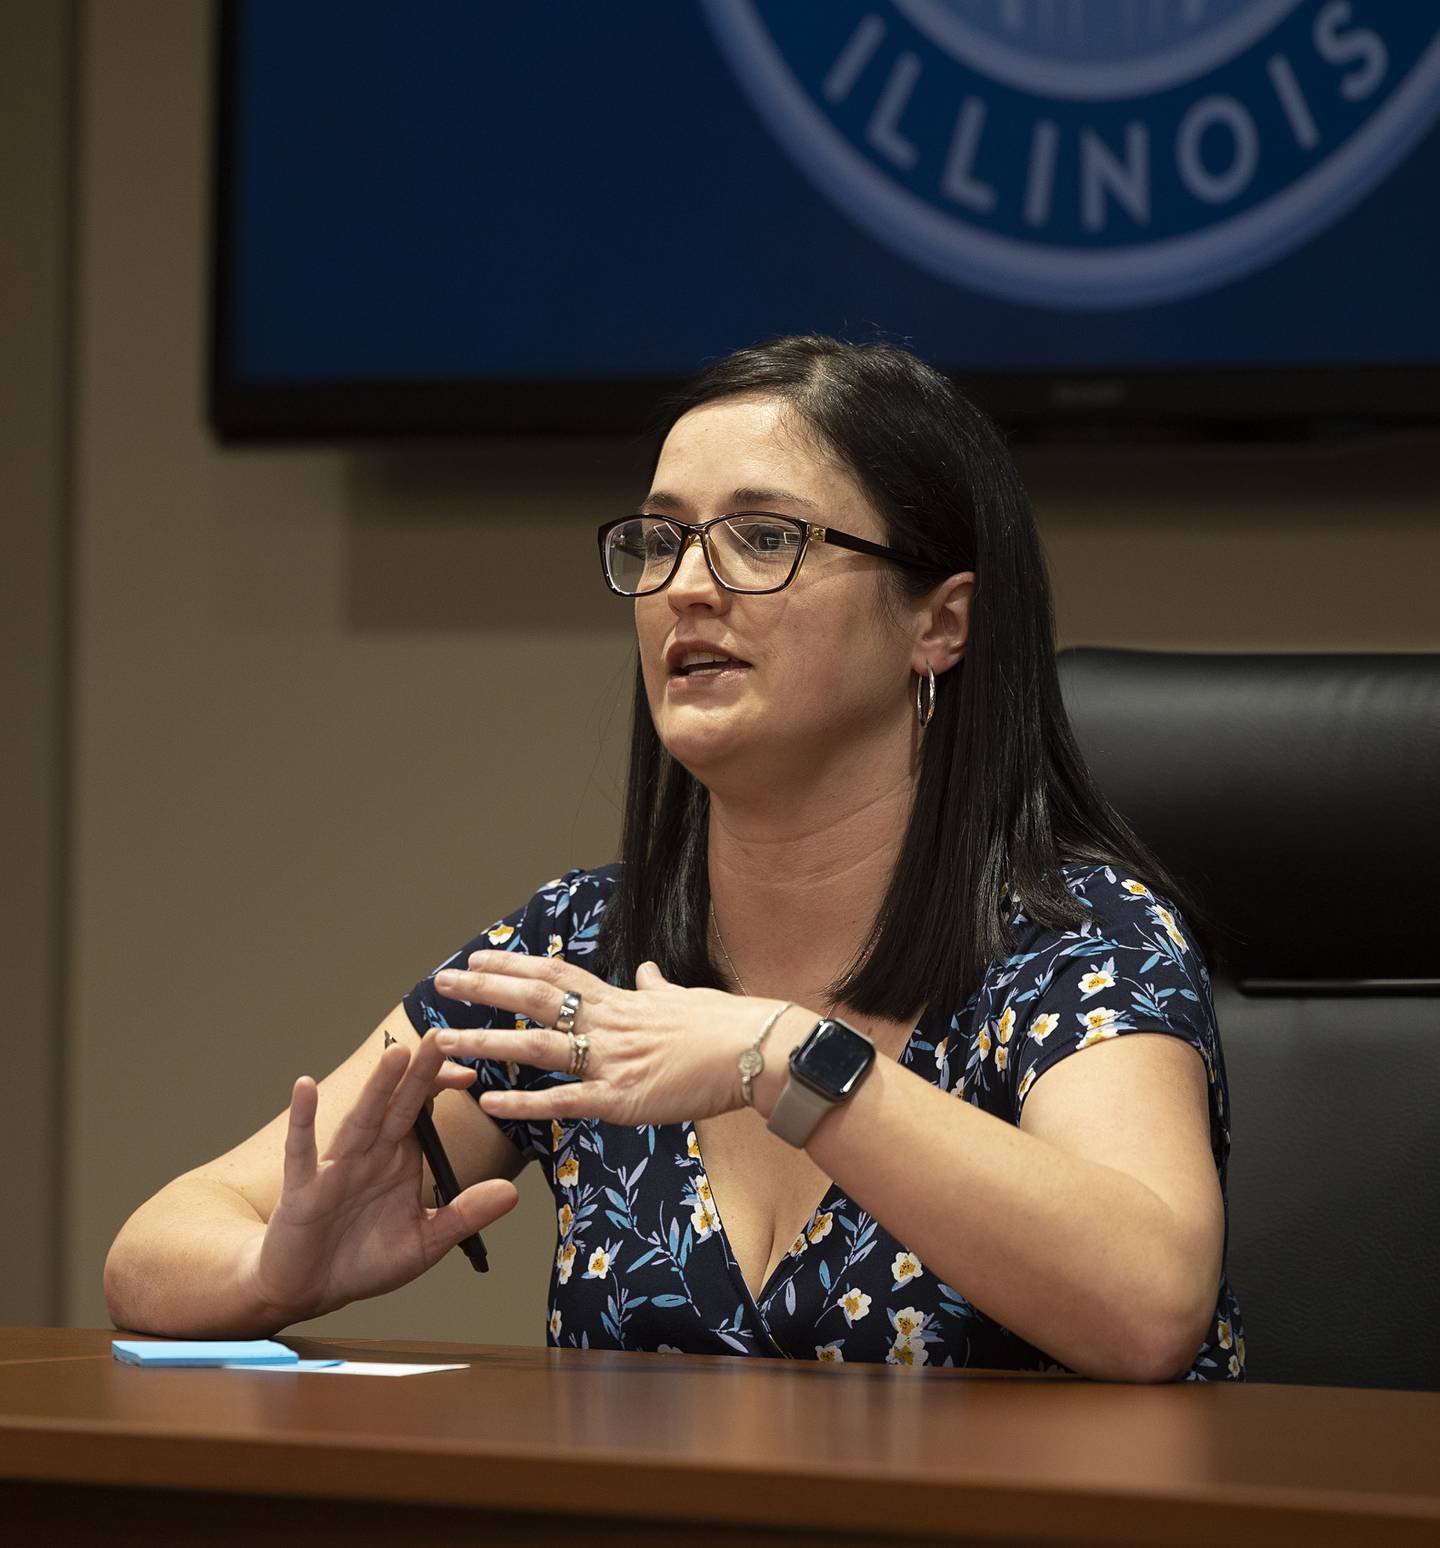 Sterling mayoral candidate Diana Merdian speaks during the Sauk Valley Area Chamber of Commerce hosted candidate forum Tuesday, March 21, 2023 for Sterling elections.